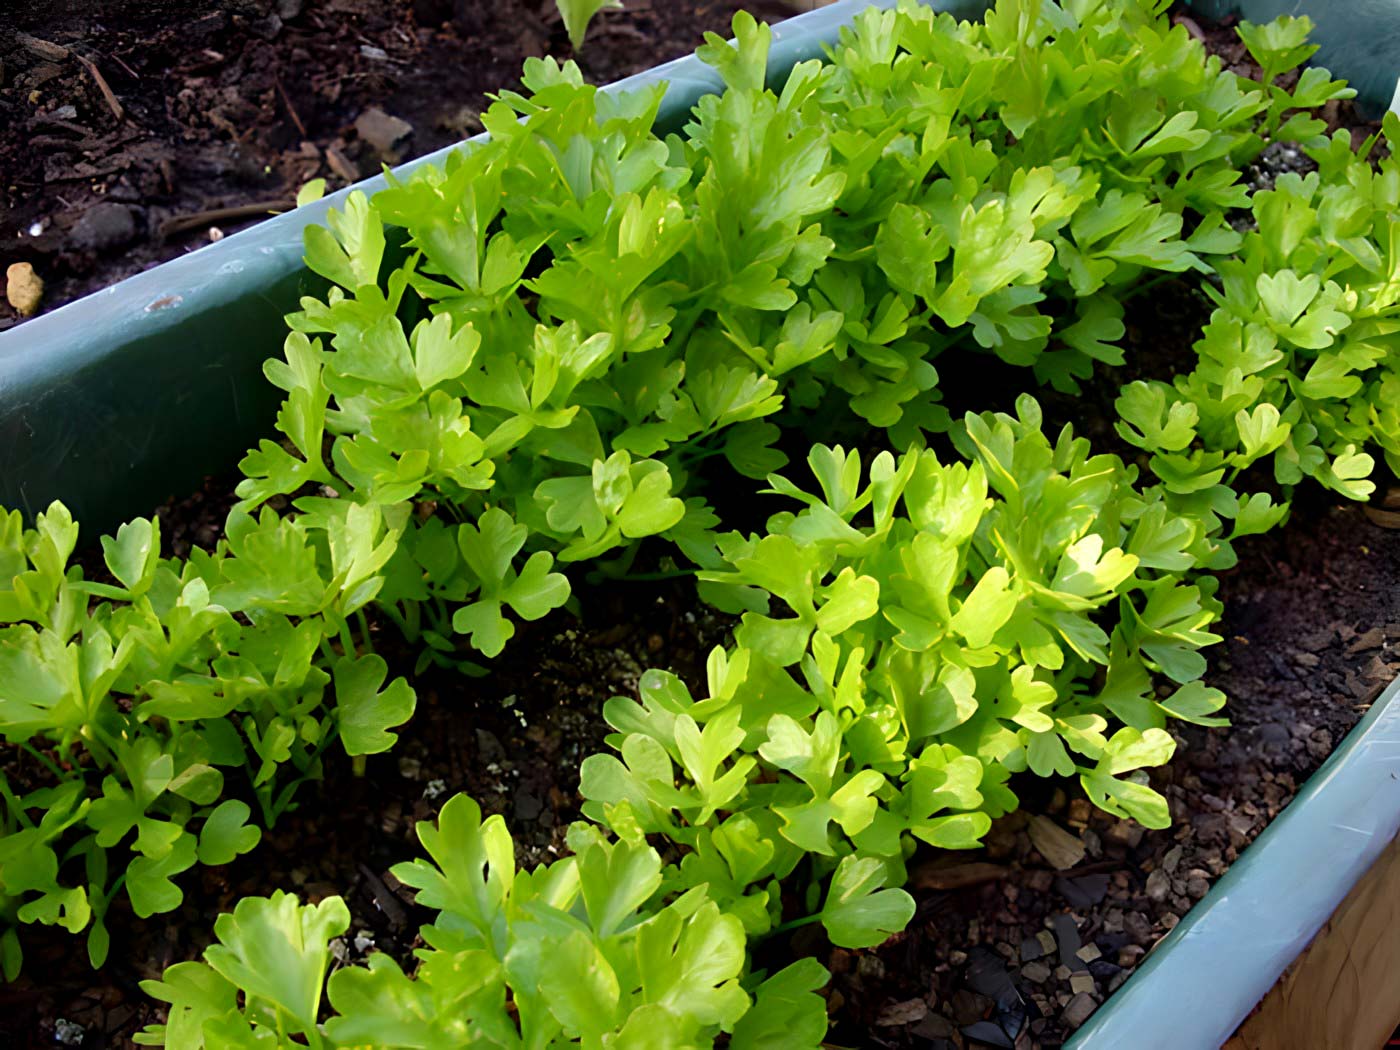 Apium graveolens, celery seedlings ready to plant out